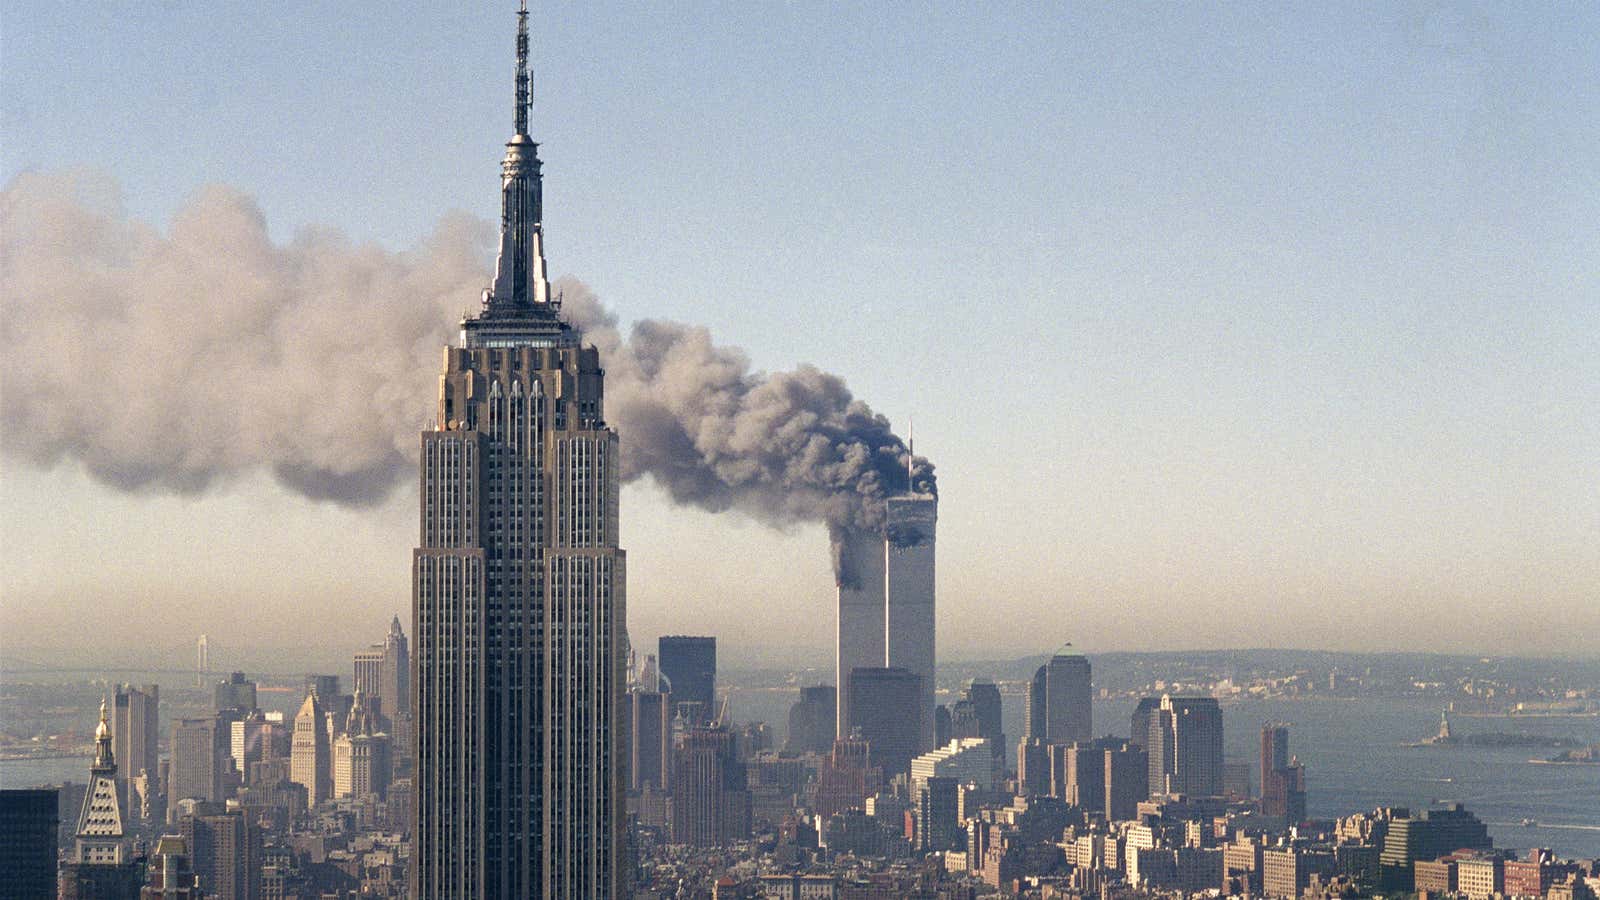 The twin towers of the World Trade Center burn behind the Empire State Building in New York.